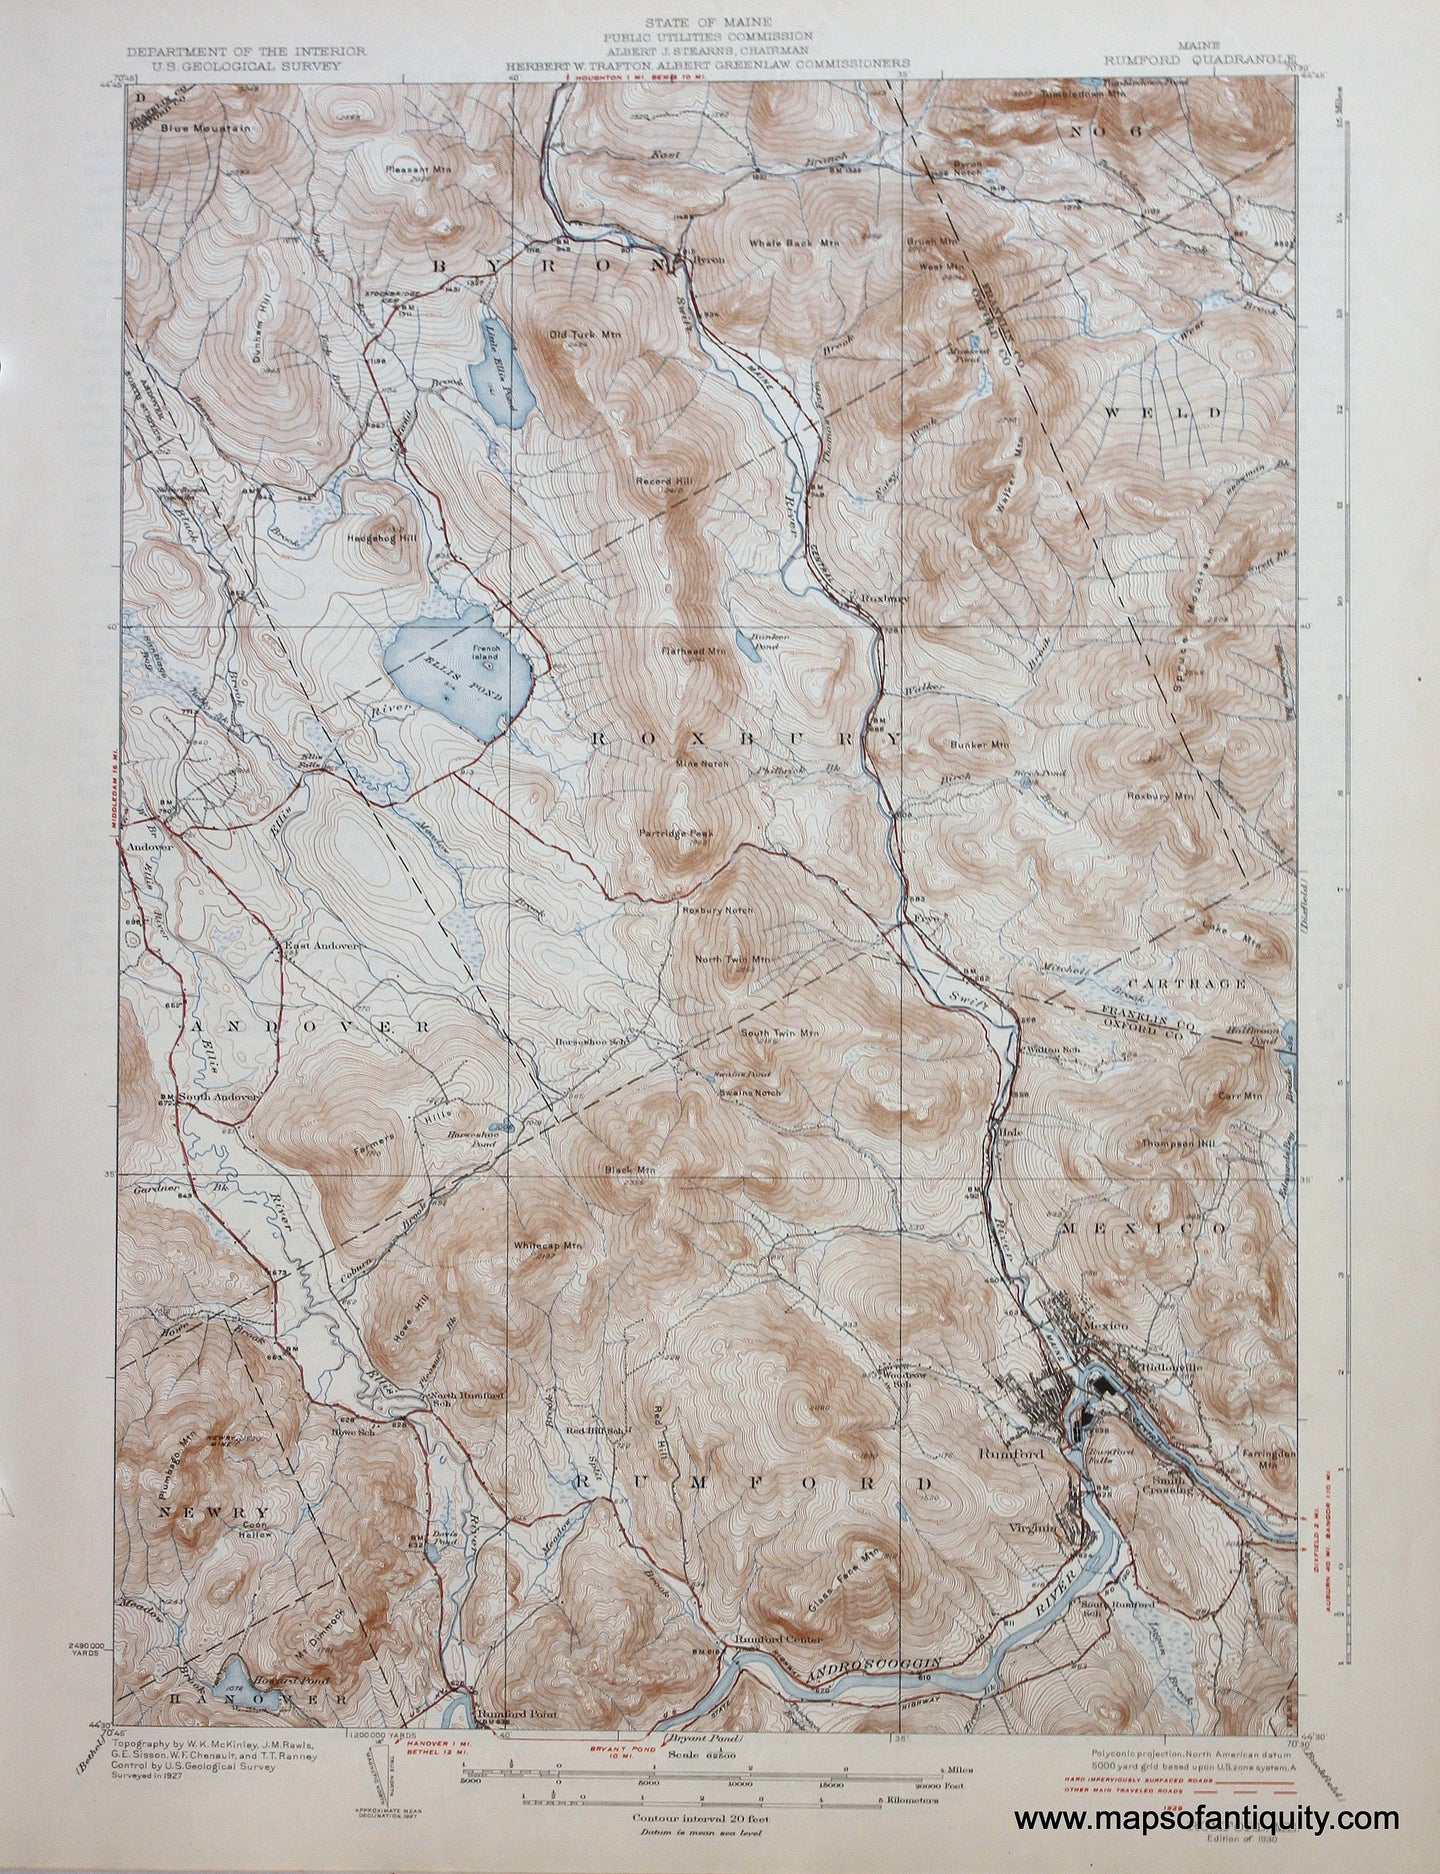 Genuine-Antique-Map-Rumford-Maine--1930-US-Geological-Survey--Maps-Of-Antiquity